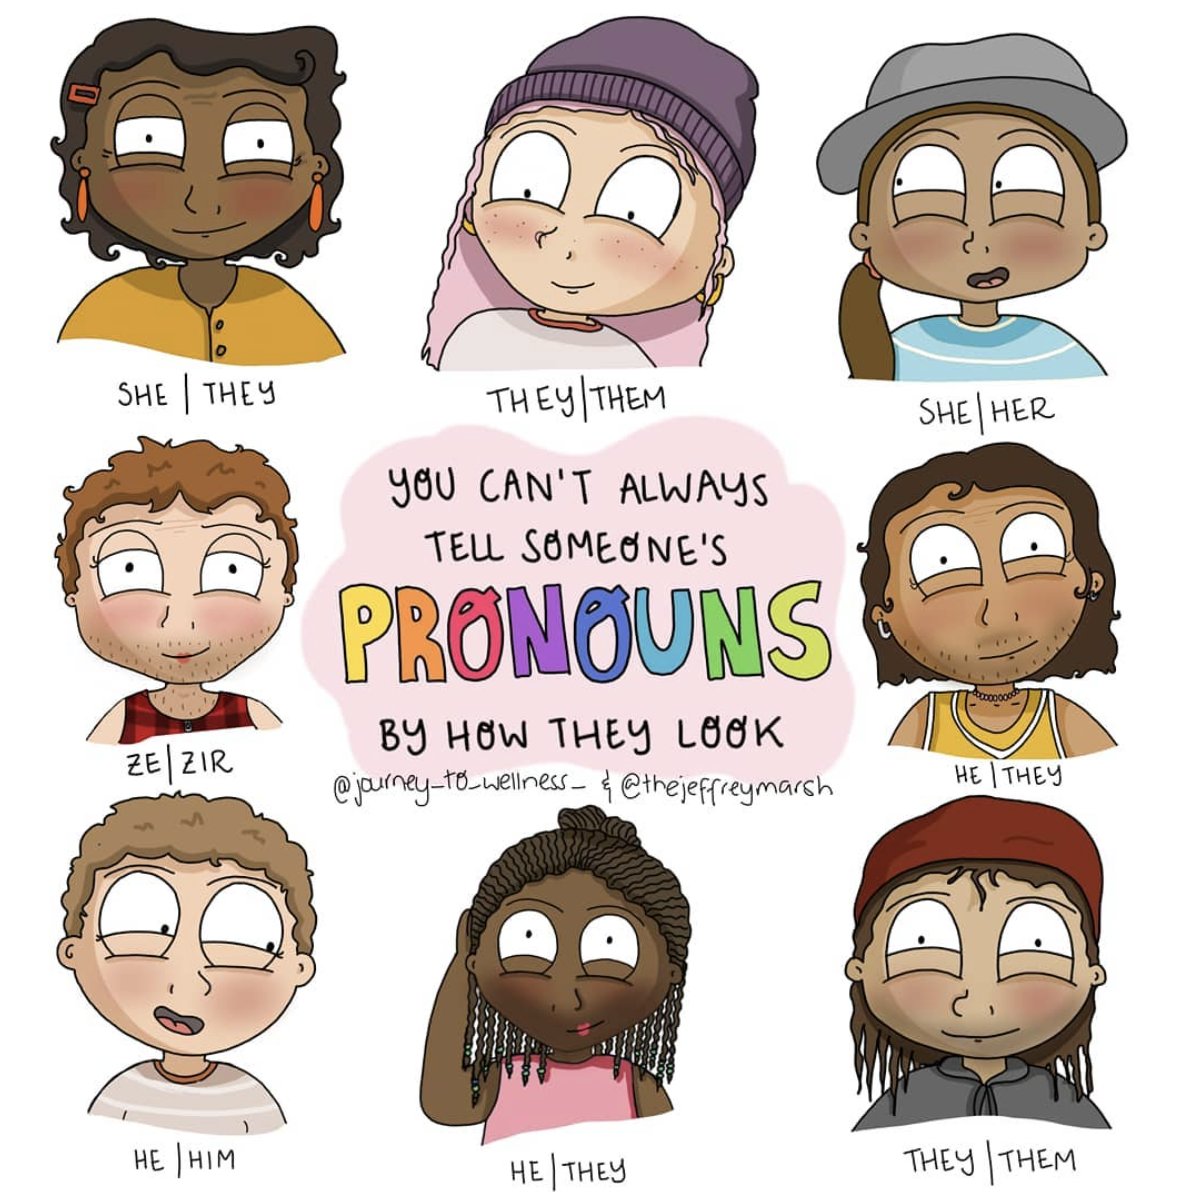 On #InternationalPronounDay, remember that respecting pronouns can be lifesaving 📊

art by journey_to_wellness_ on IG with @thejeffreymarsh 🎨

Learn more about how to honor the day at @PronounsDay 🧡 #pronouns